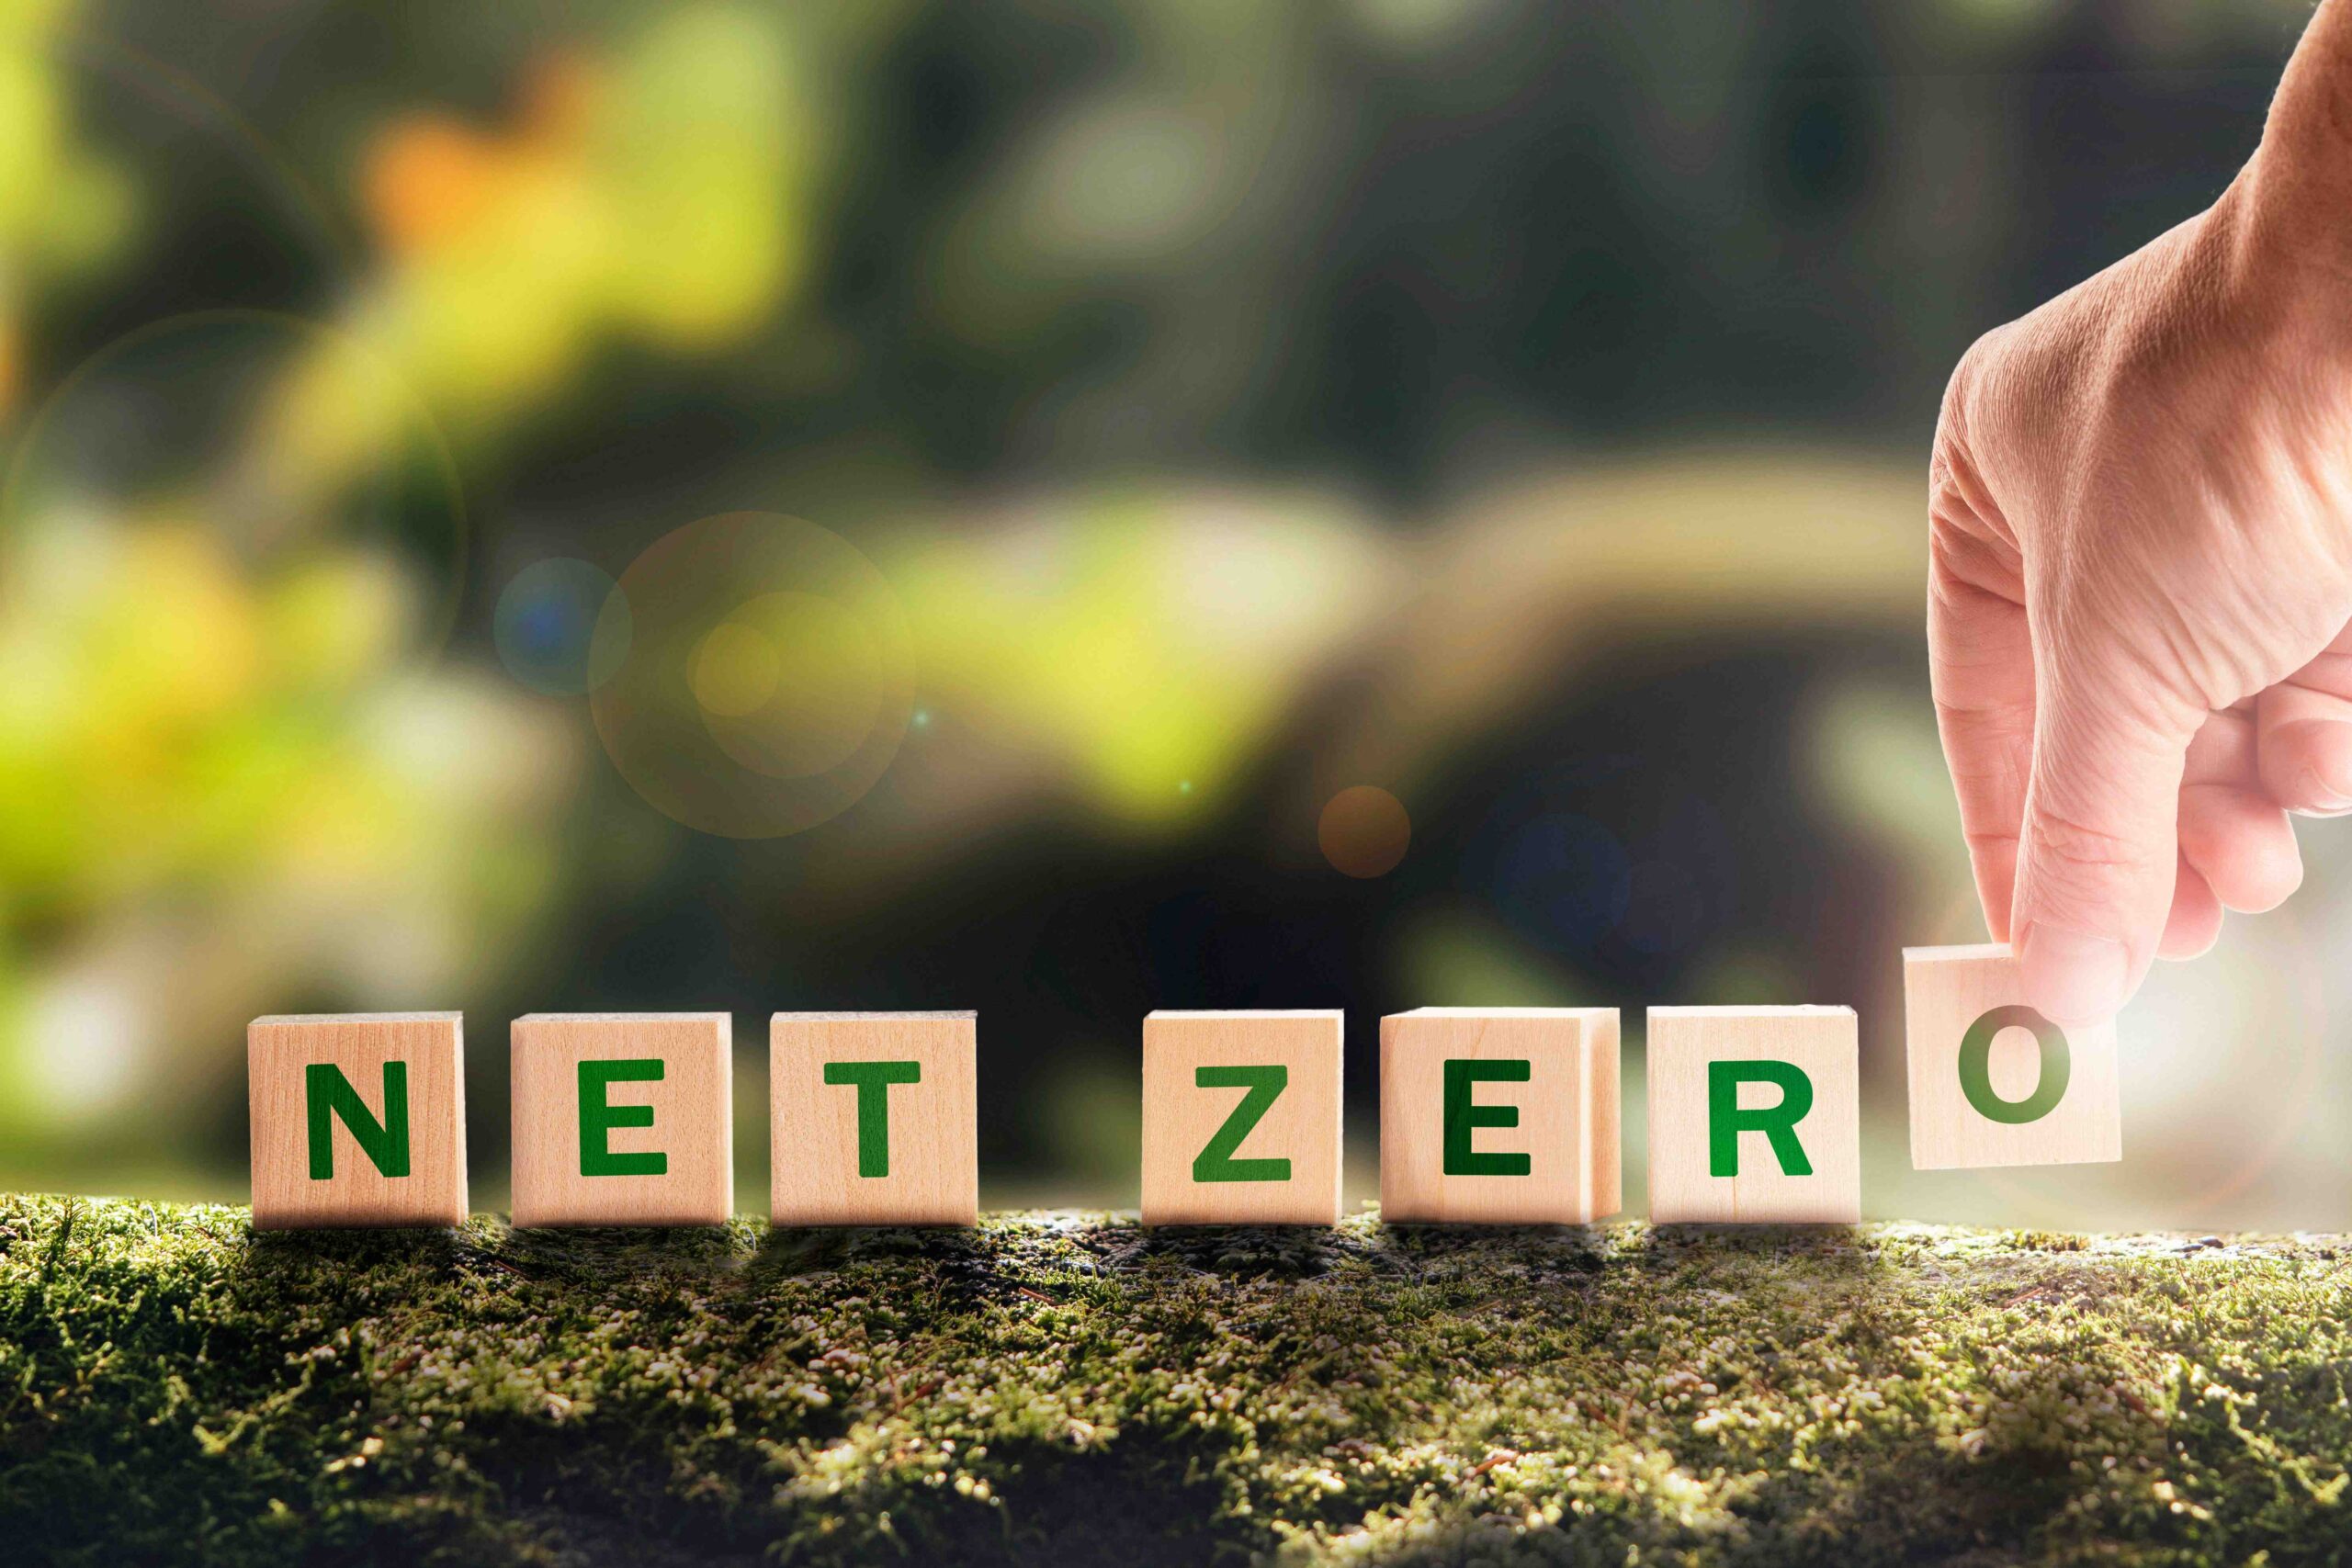 What does “Net Zero” mean? Why is “Tree” one of the assistants who can all confirm “yes”?